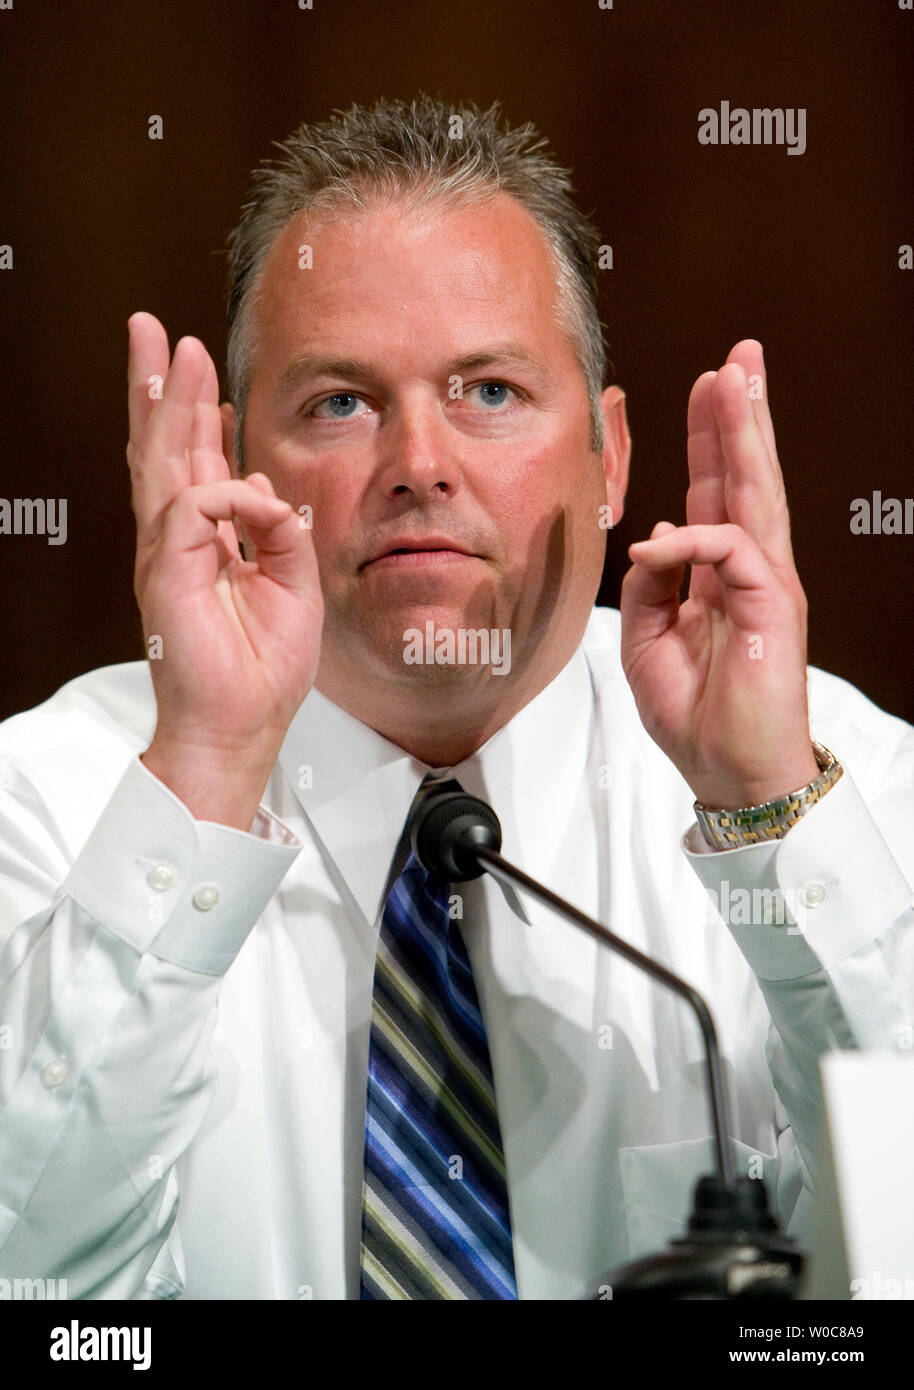 Jeffery Bliss, former KBR electrician, testifies during a Senate Democratic Policy Committee hearing on 'contractor misconduct and the electrocution deaths of American soldiers in Iraq' on Capitol Hill in Washington on July 11, 2008. (UPI Photo/Patrick D. McDermott) Stock Photo